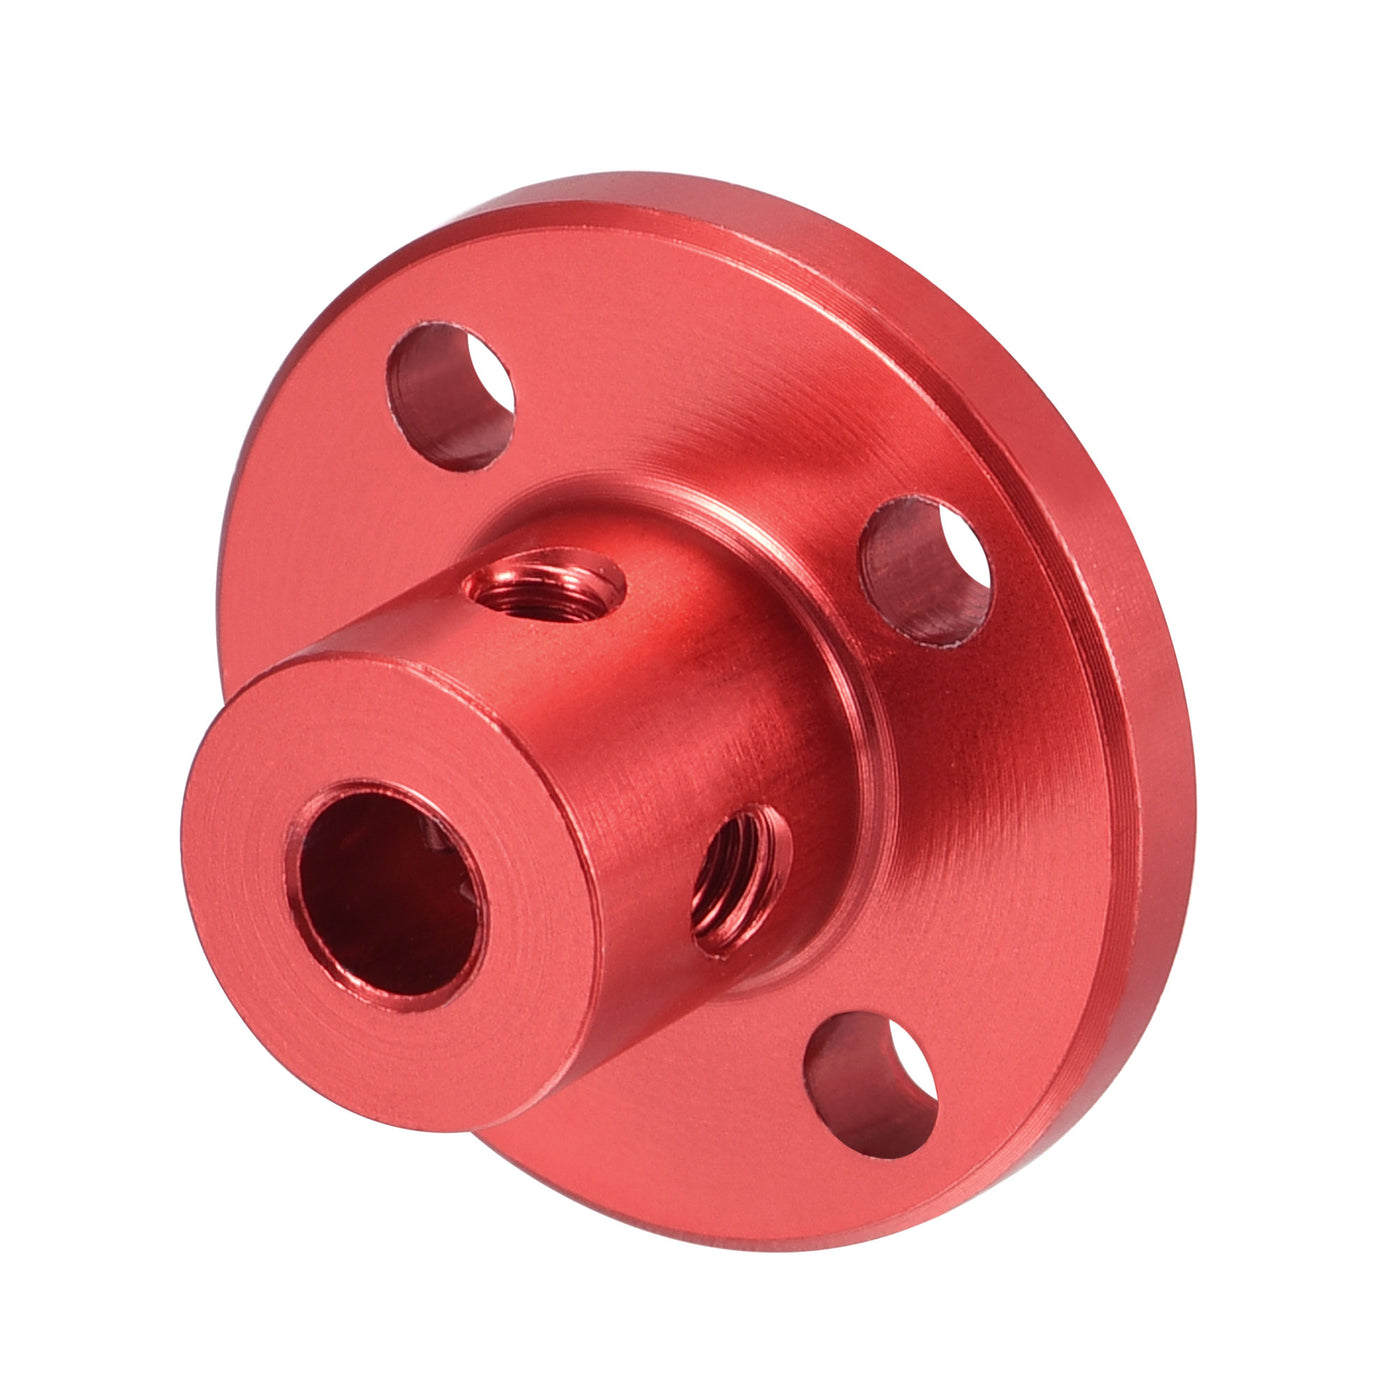 Uxcell Uxcell 3mm Dia H13xD10 Rigid Flange Coupling Motor Shaft Coupler DIY Red